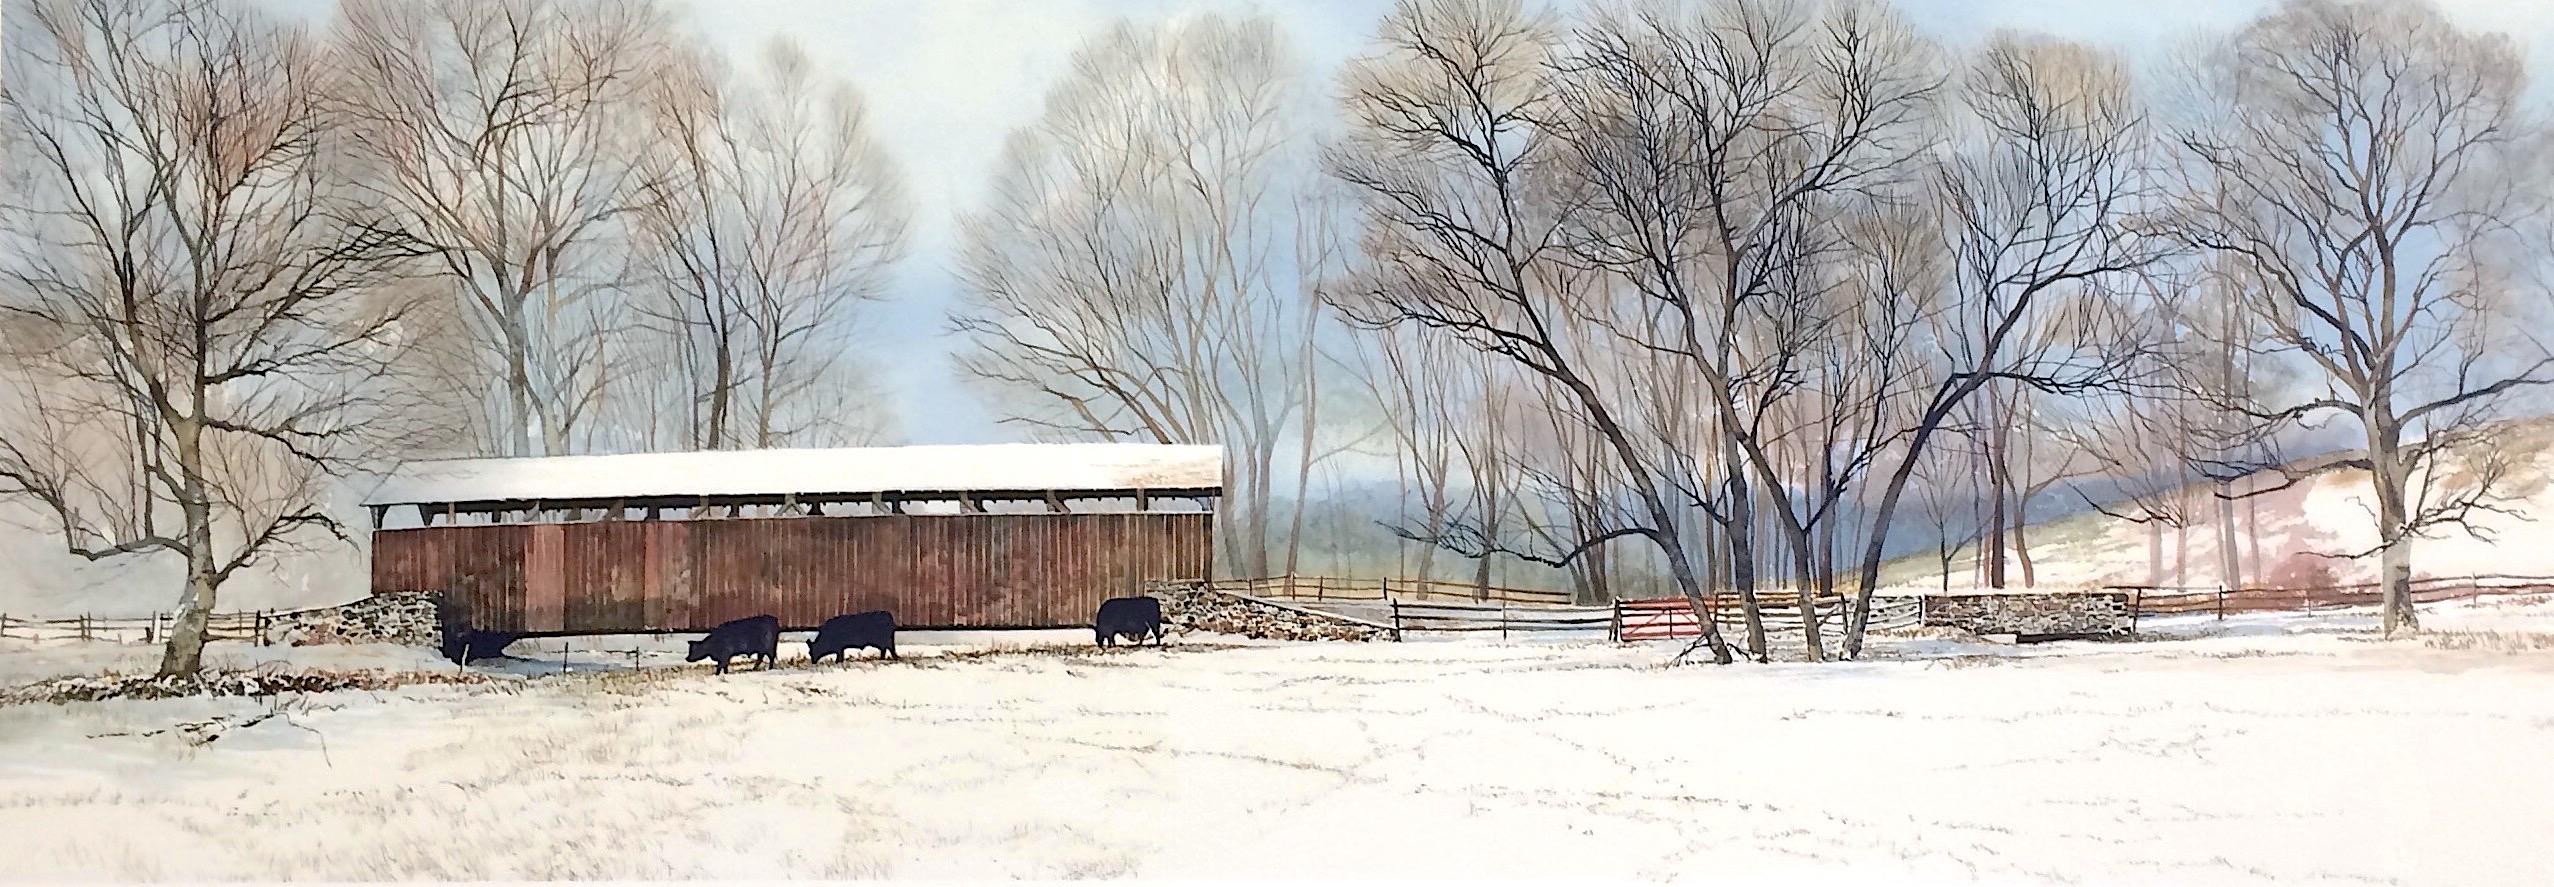 Peter Sculthorpe Animal Print - BUCK RUN BRIDGE Signed Lithograph, Historic Covered Bridge, Chester County, Cows